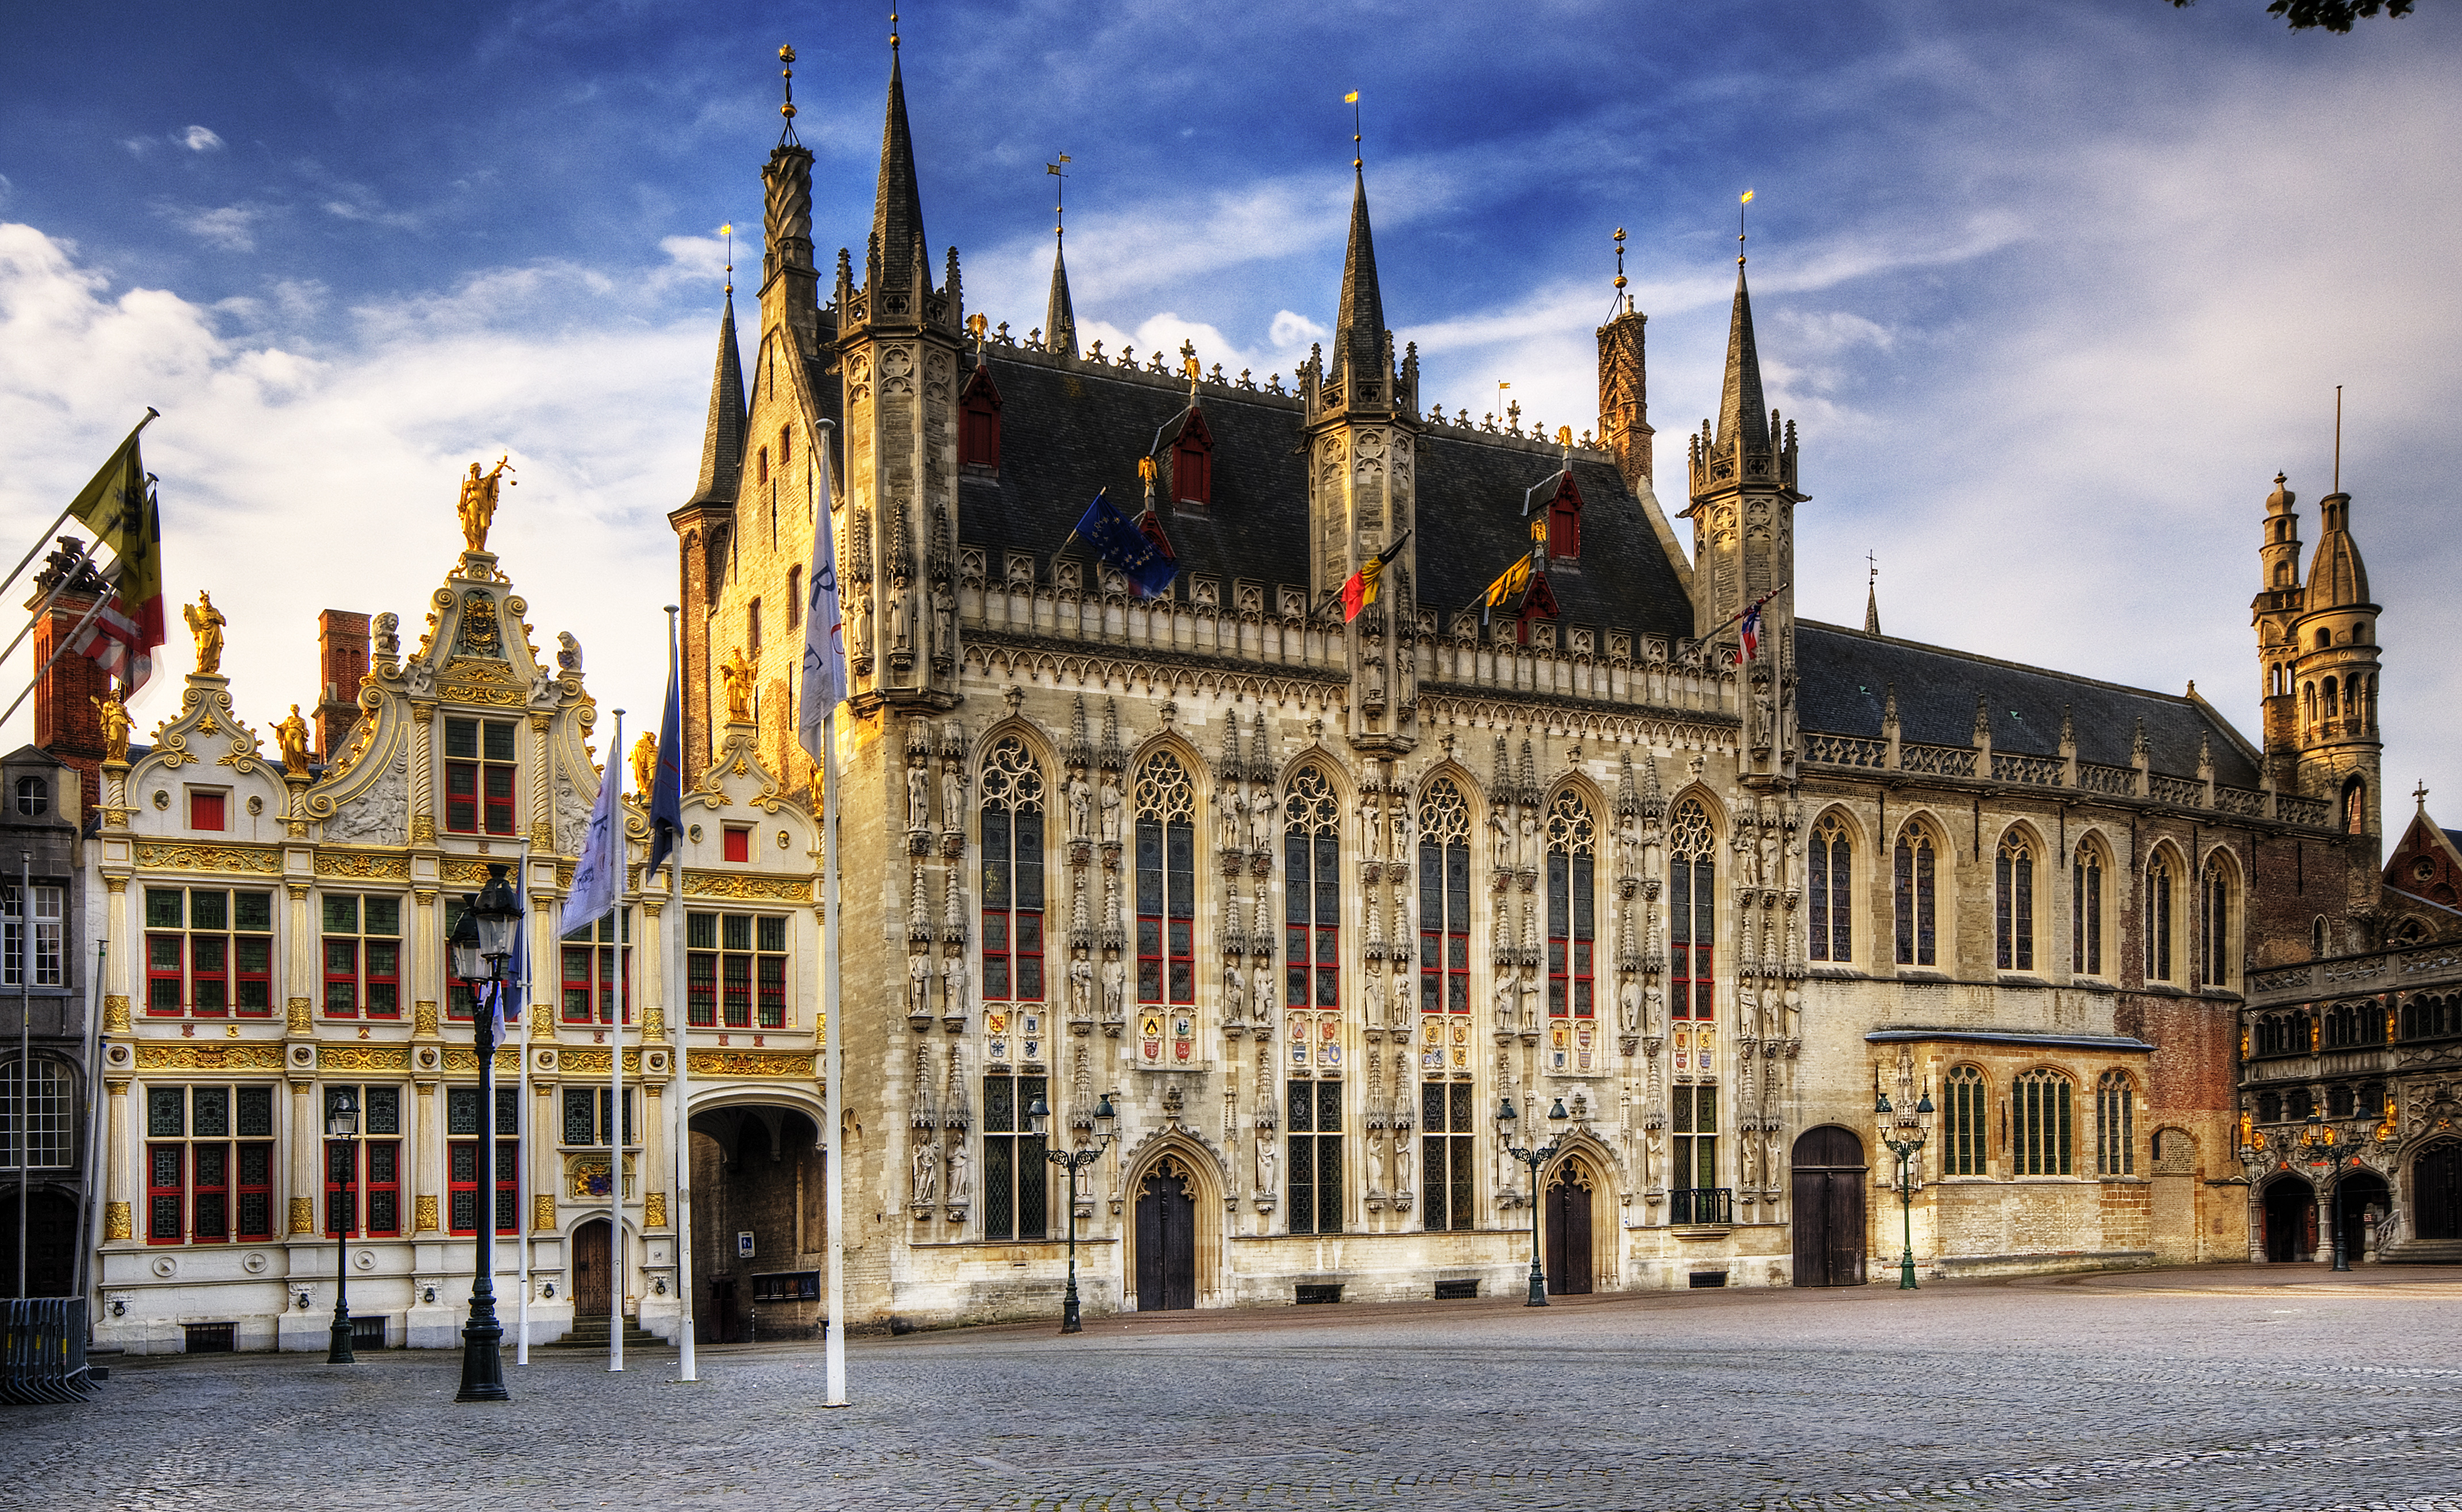 File:Town hall Brugge.jpg - Wikimedia Commons